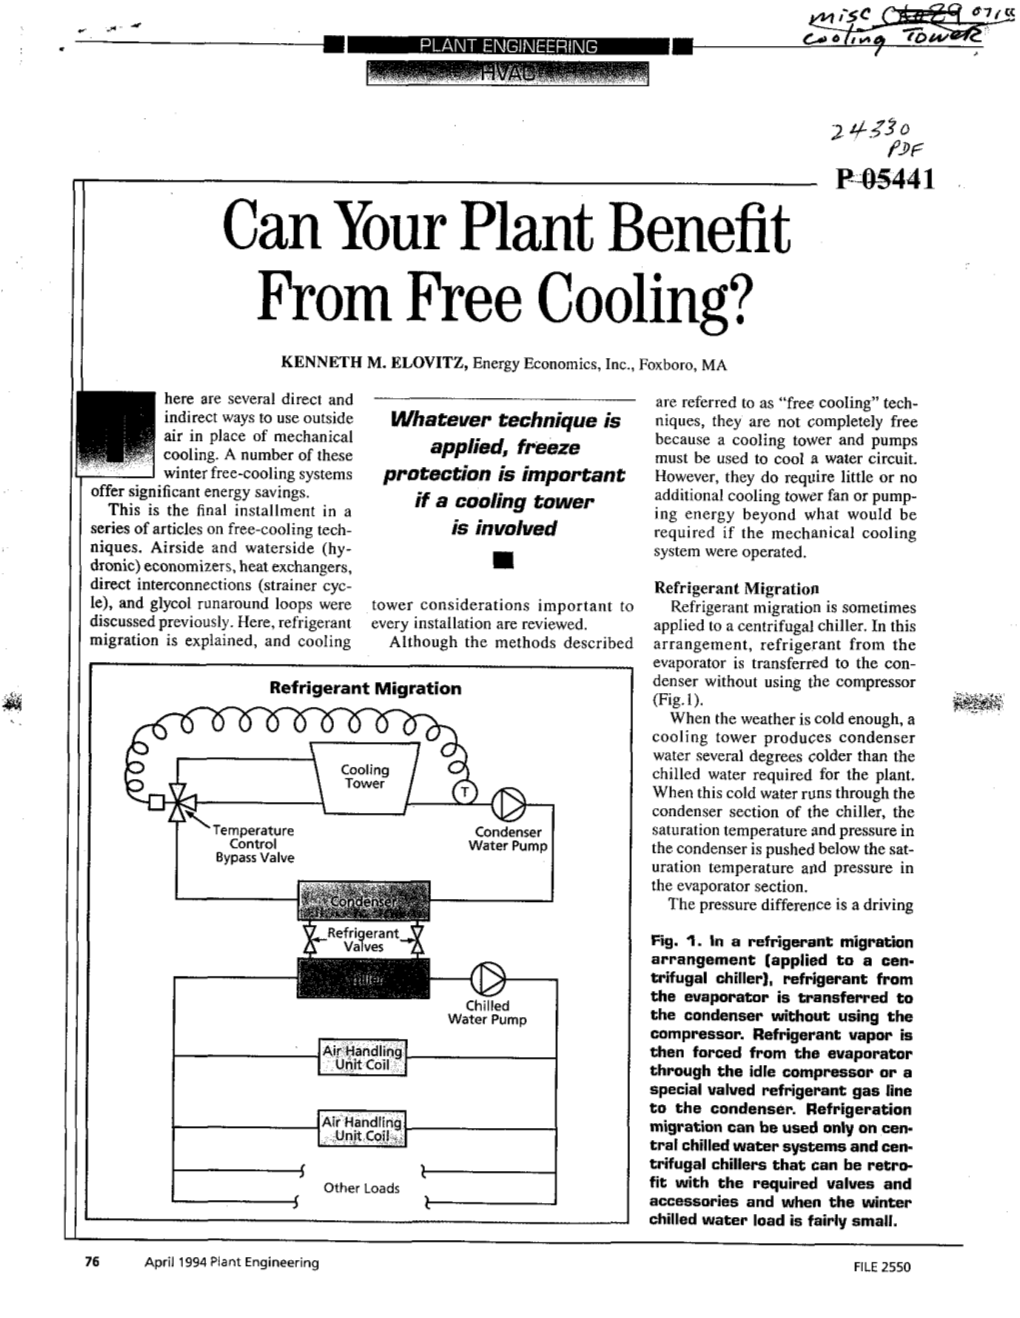 Can Your Plant Benefit from Free Cooling?